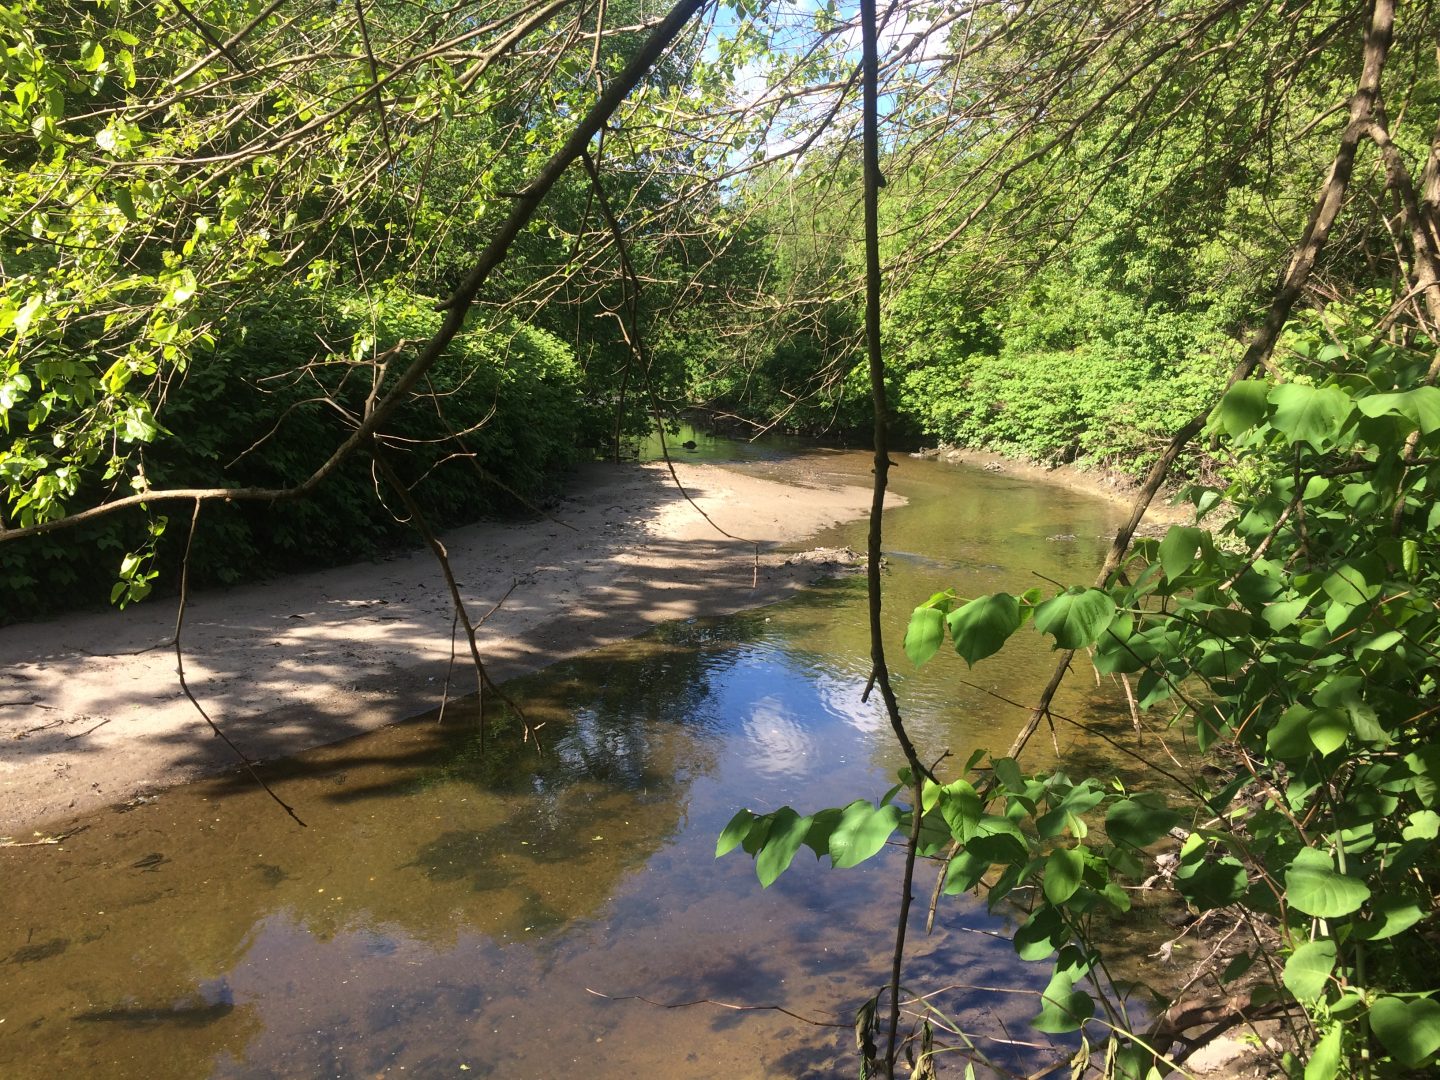 Cobbs Creek flows from heavily developed upstream communities down to Eastwick, which bares the brunt of flooding during heavy storms.